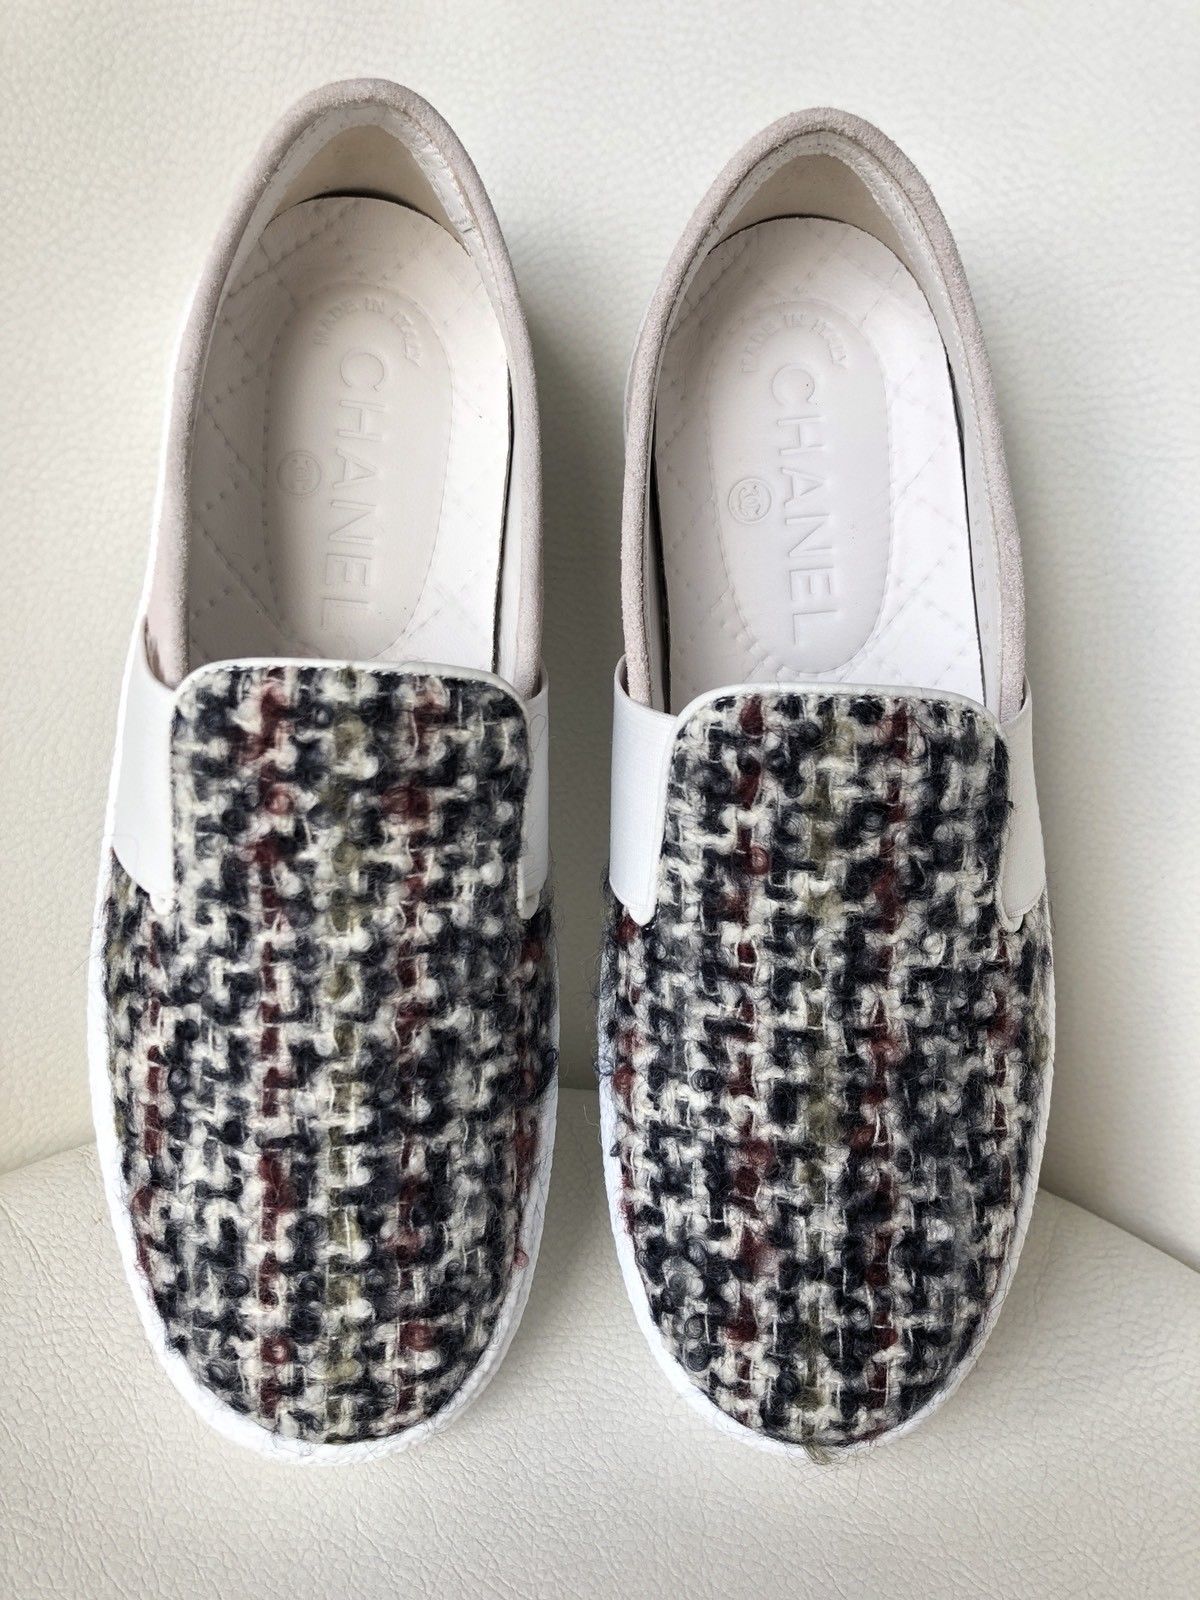 CHANEL PLAID TWEED SUEDE GREY SLIP ON LOAFERS MOCCASIN SHOES